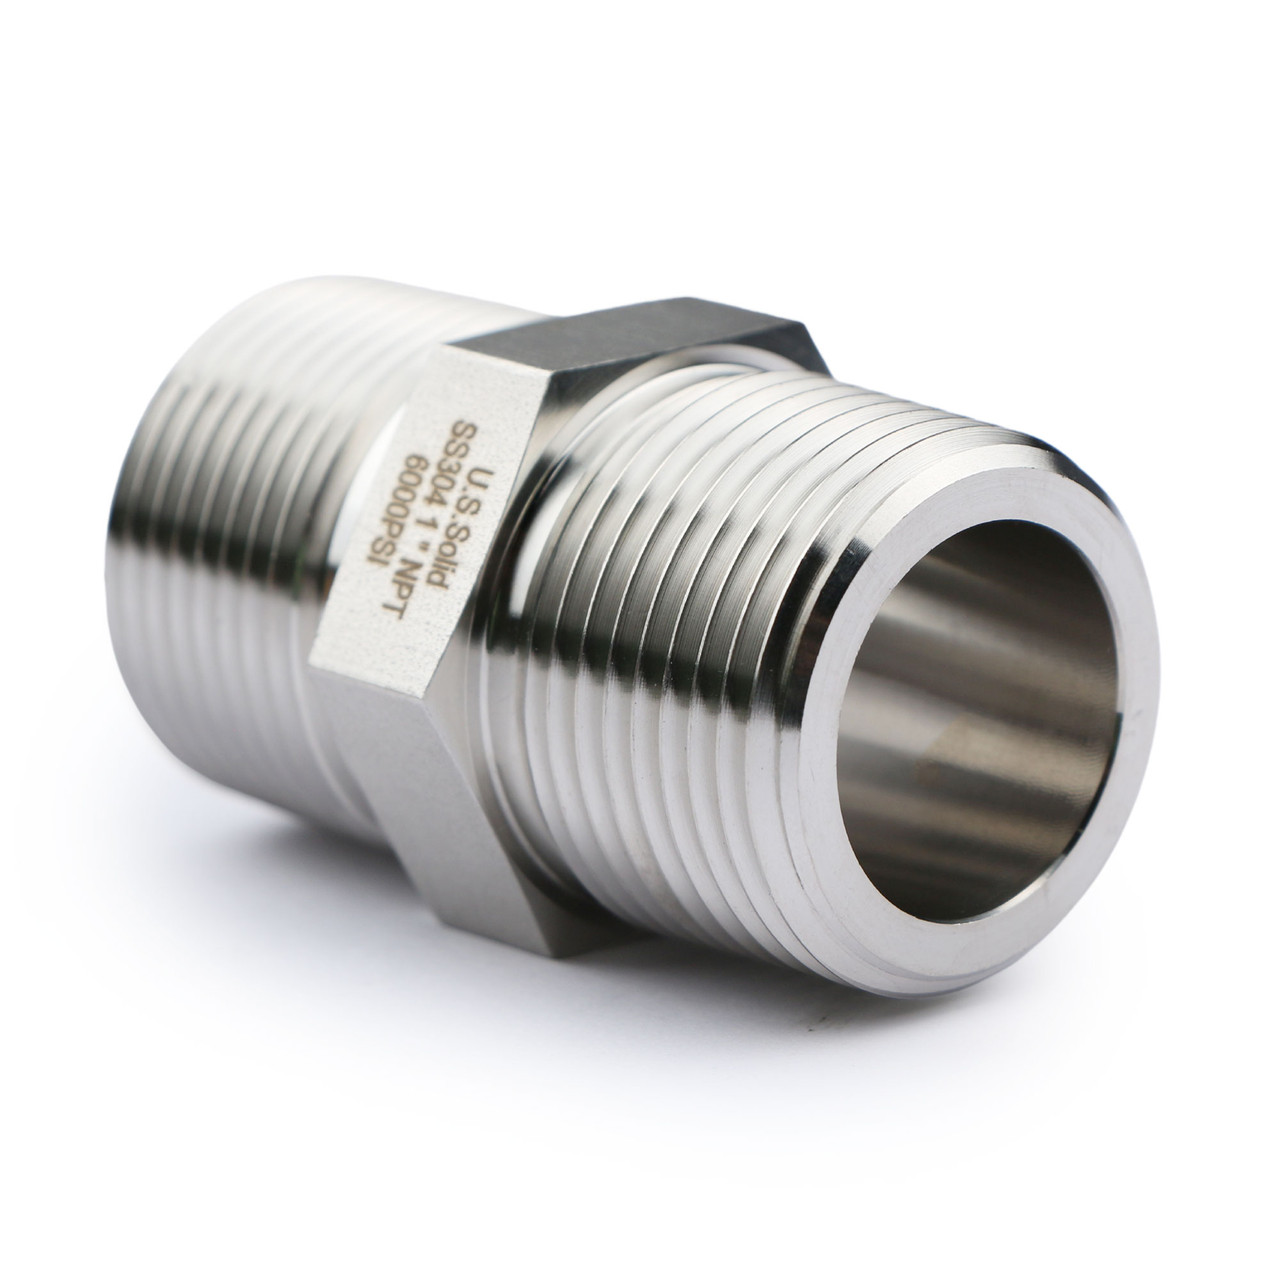 U.S. Solid 304 Stainless Steel Lead Free 6000 psi High Pressure Hex Nipple,  1 x 1 NPT Male Thread Pipe Adapter(1 pc)